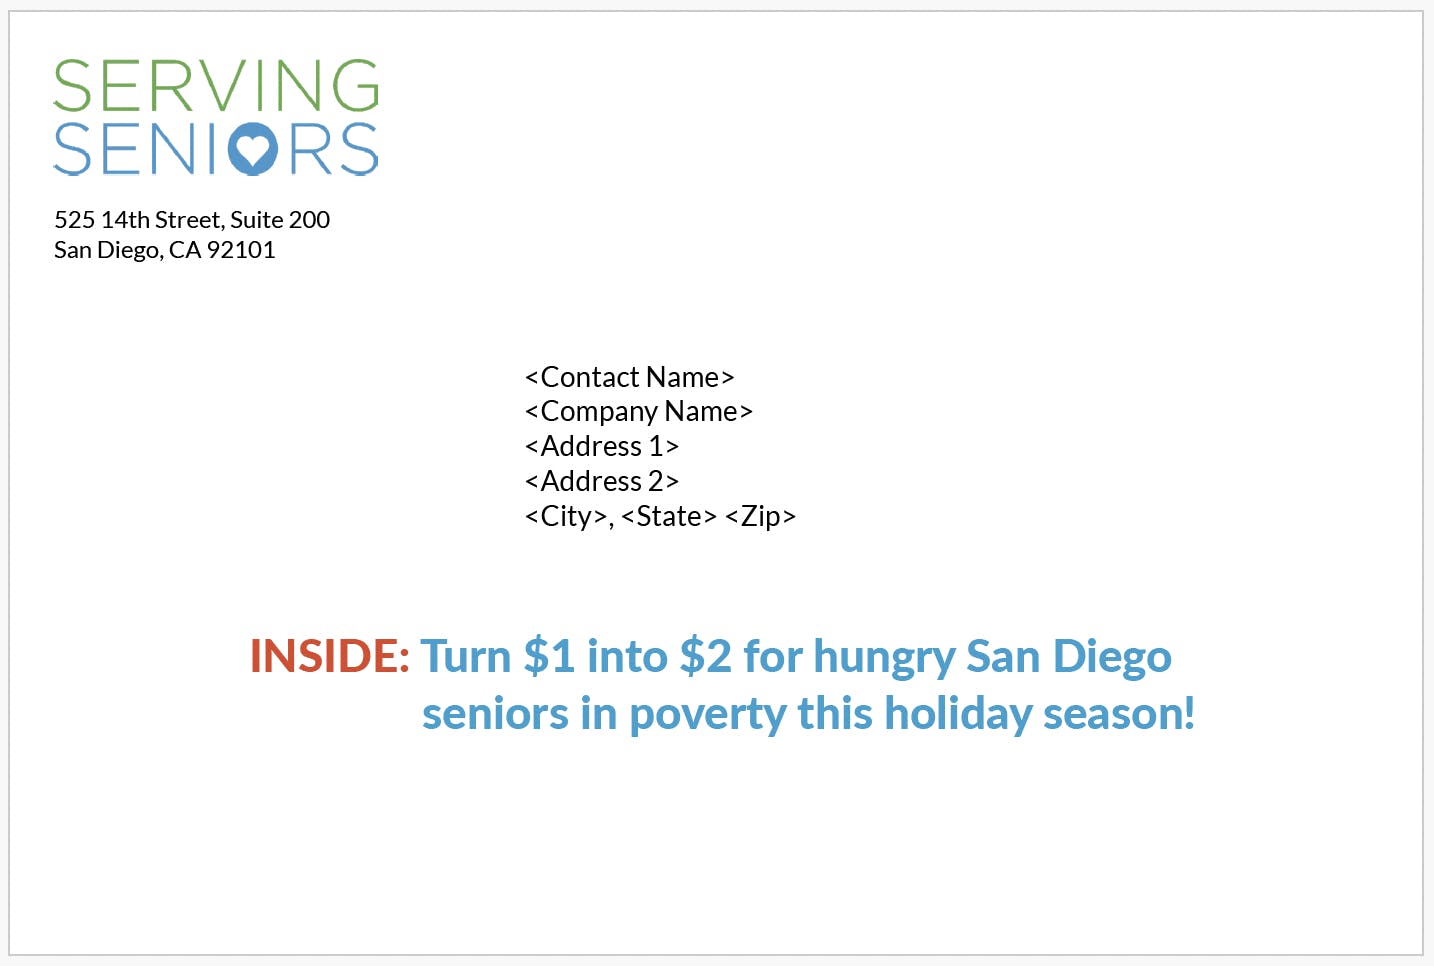 image of an outer envelope with the teaser copy: "INSIDE: Turn $1 into $2 for hungry San Diego seniors in poverty this holiday season!